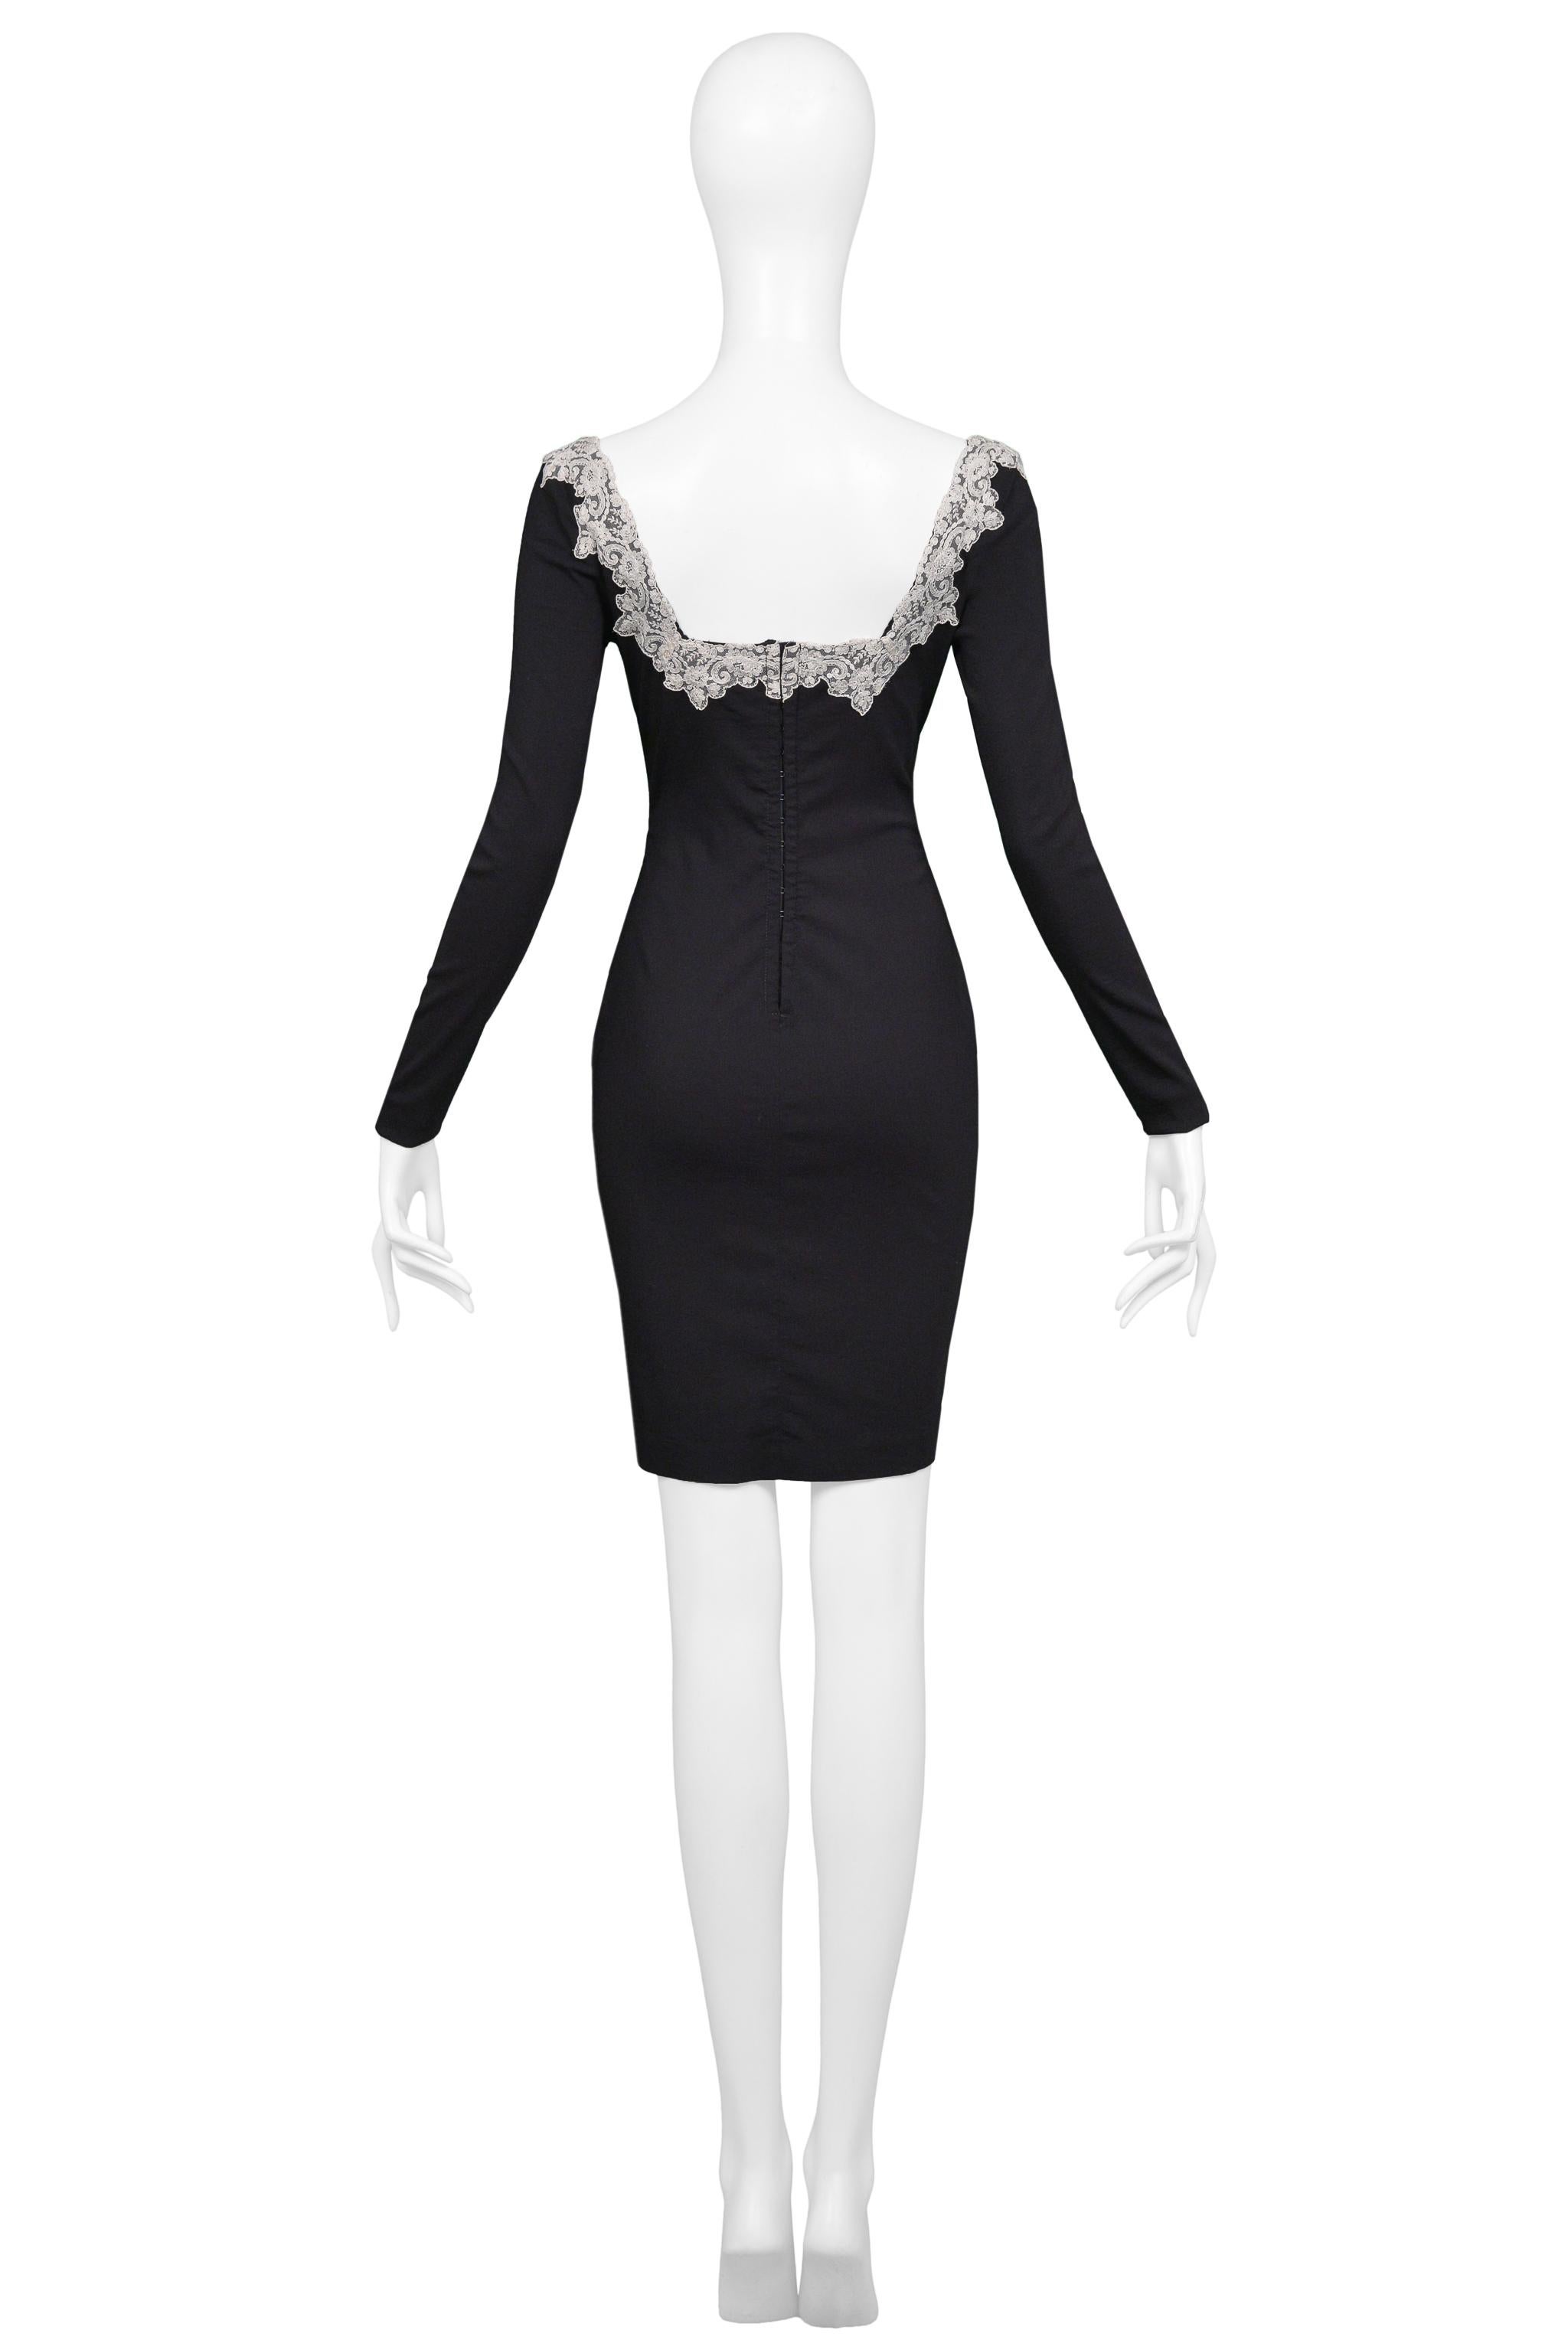 Chantal Thomass Black Corset Dress With Lace Collar 1994 In Excellent Condition In Los Angeles, CA